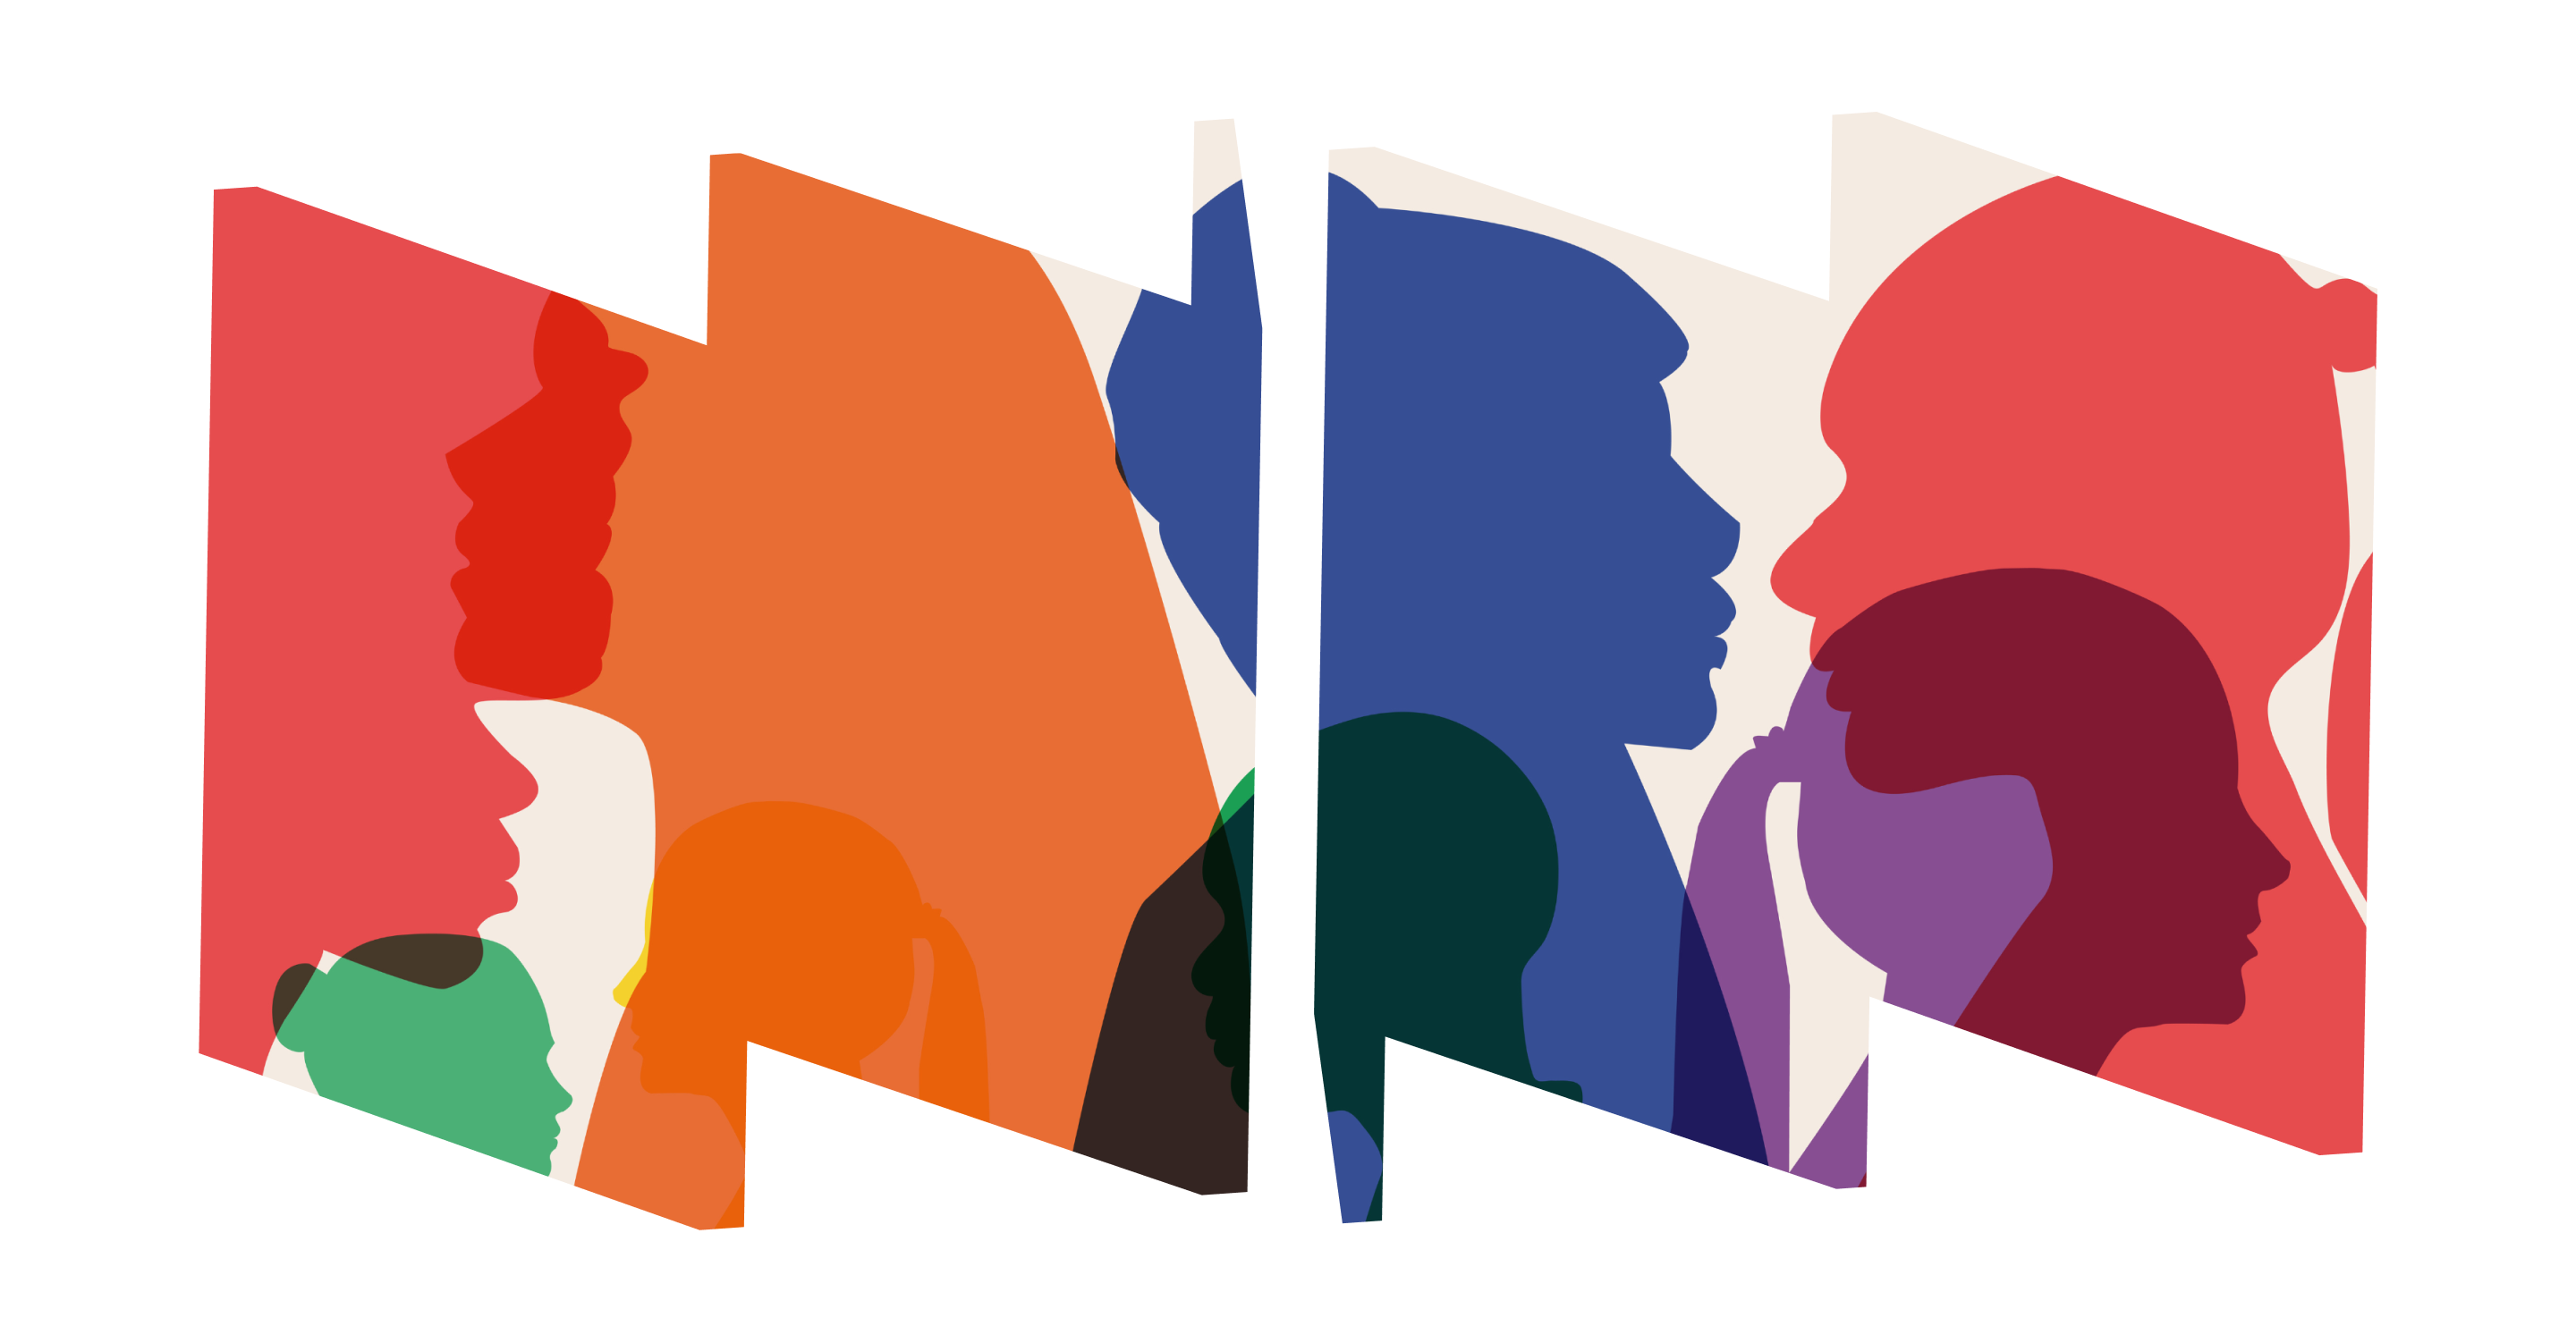 Group side silhouette illustration of men and women in various primary colors.